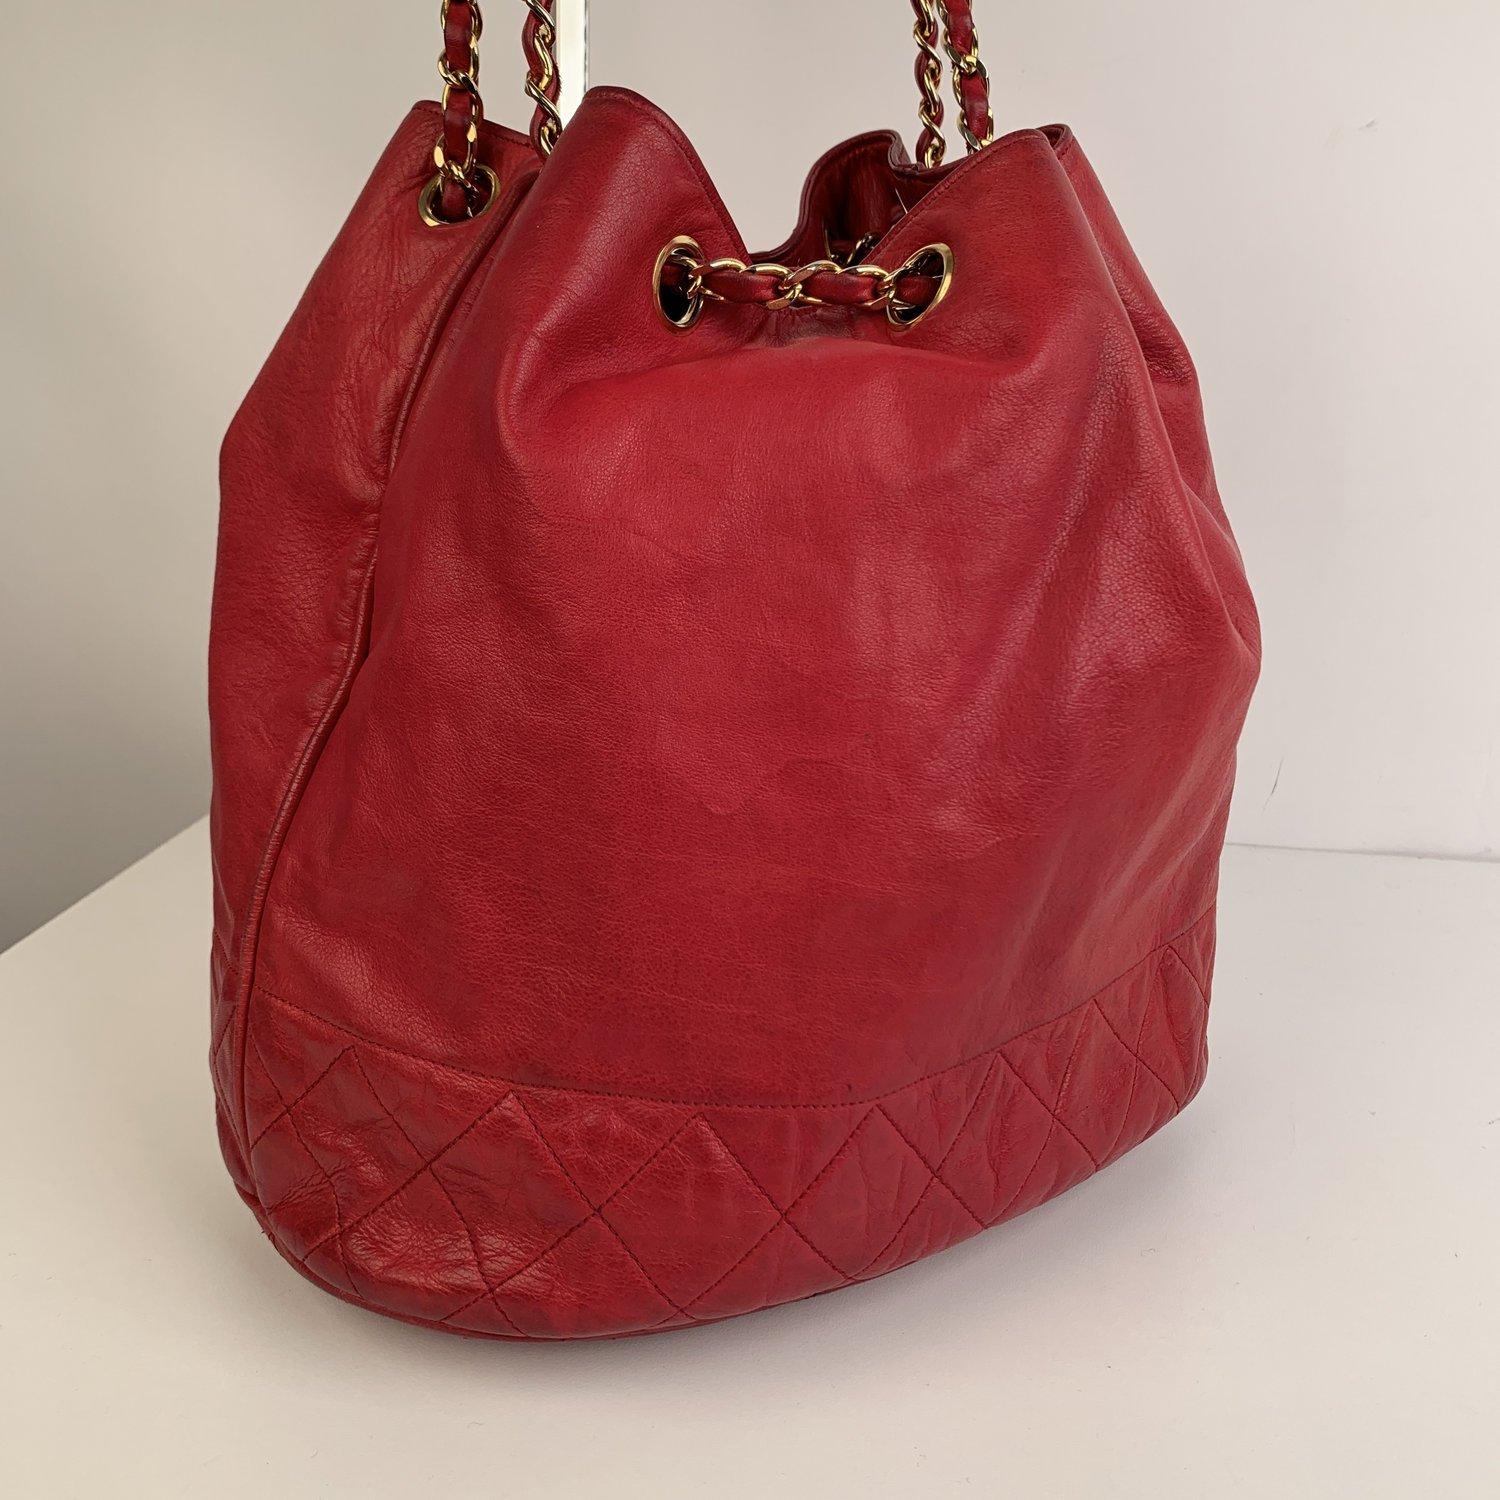 Women's Chanel Vintage Red Leather Bucket Shoulder Bag with Bottom Quilting